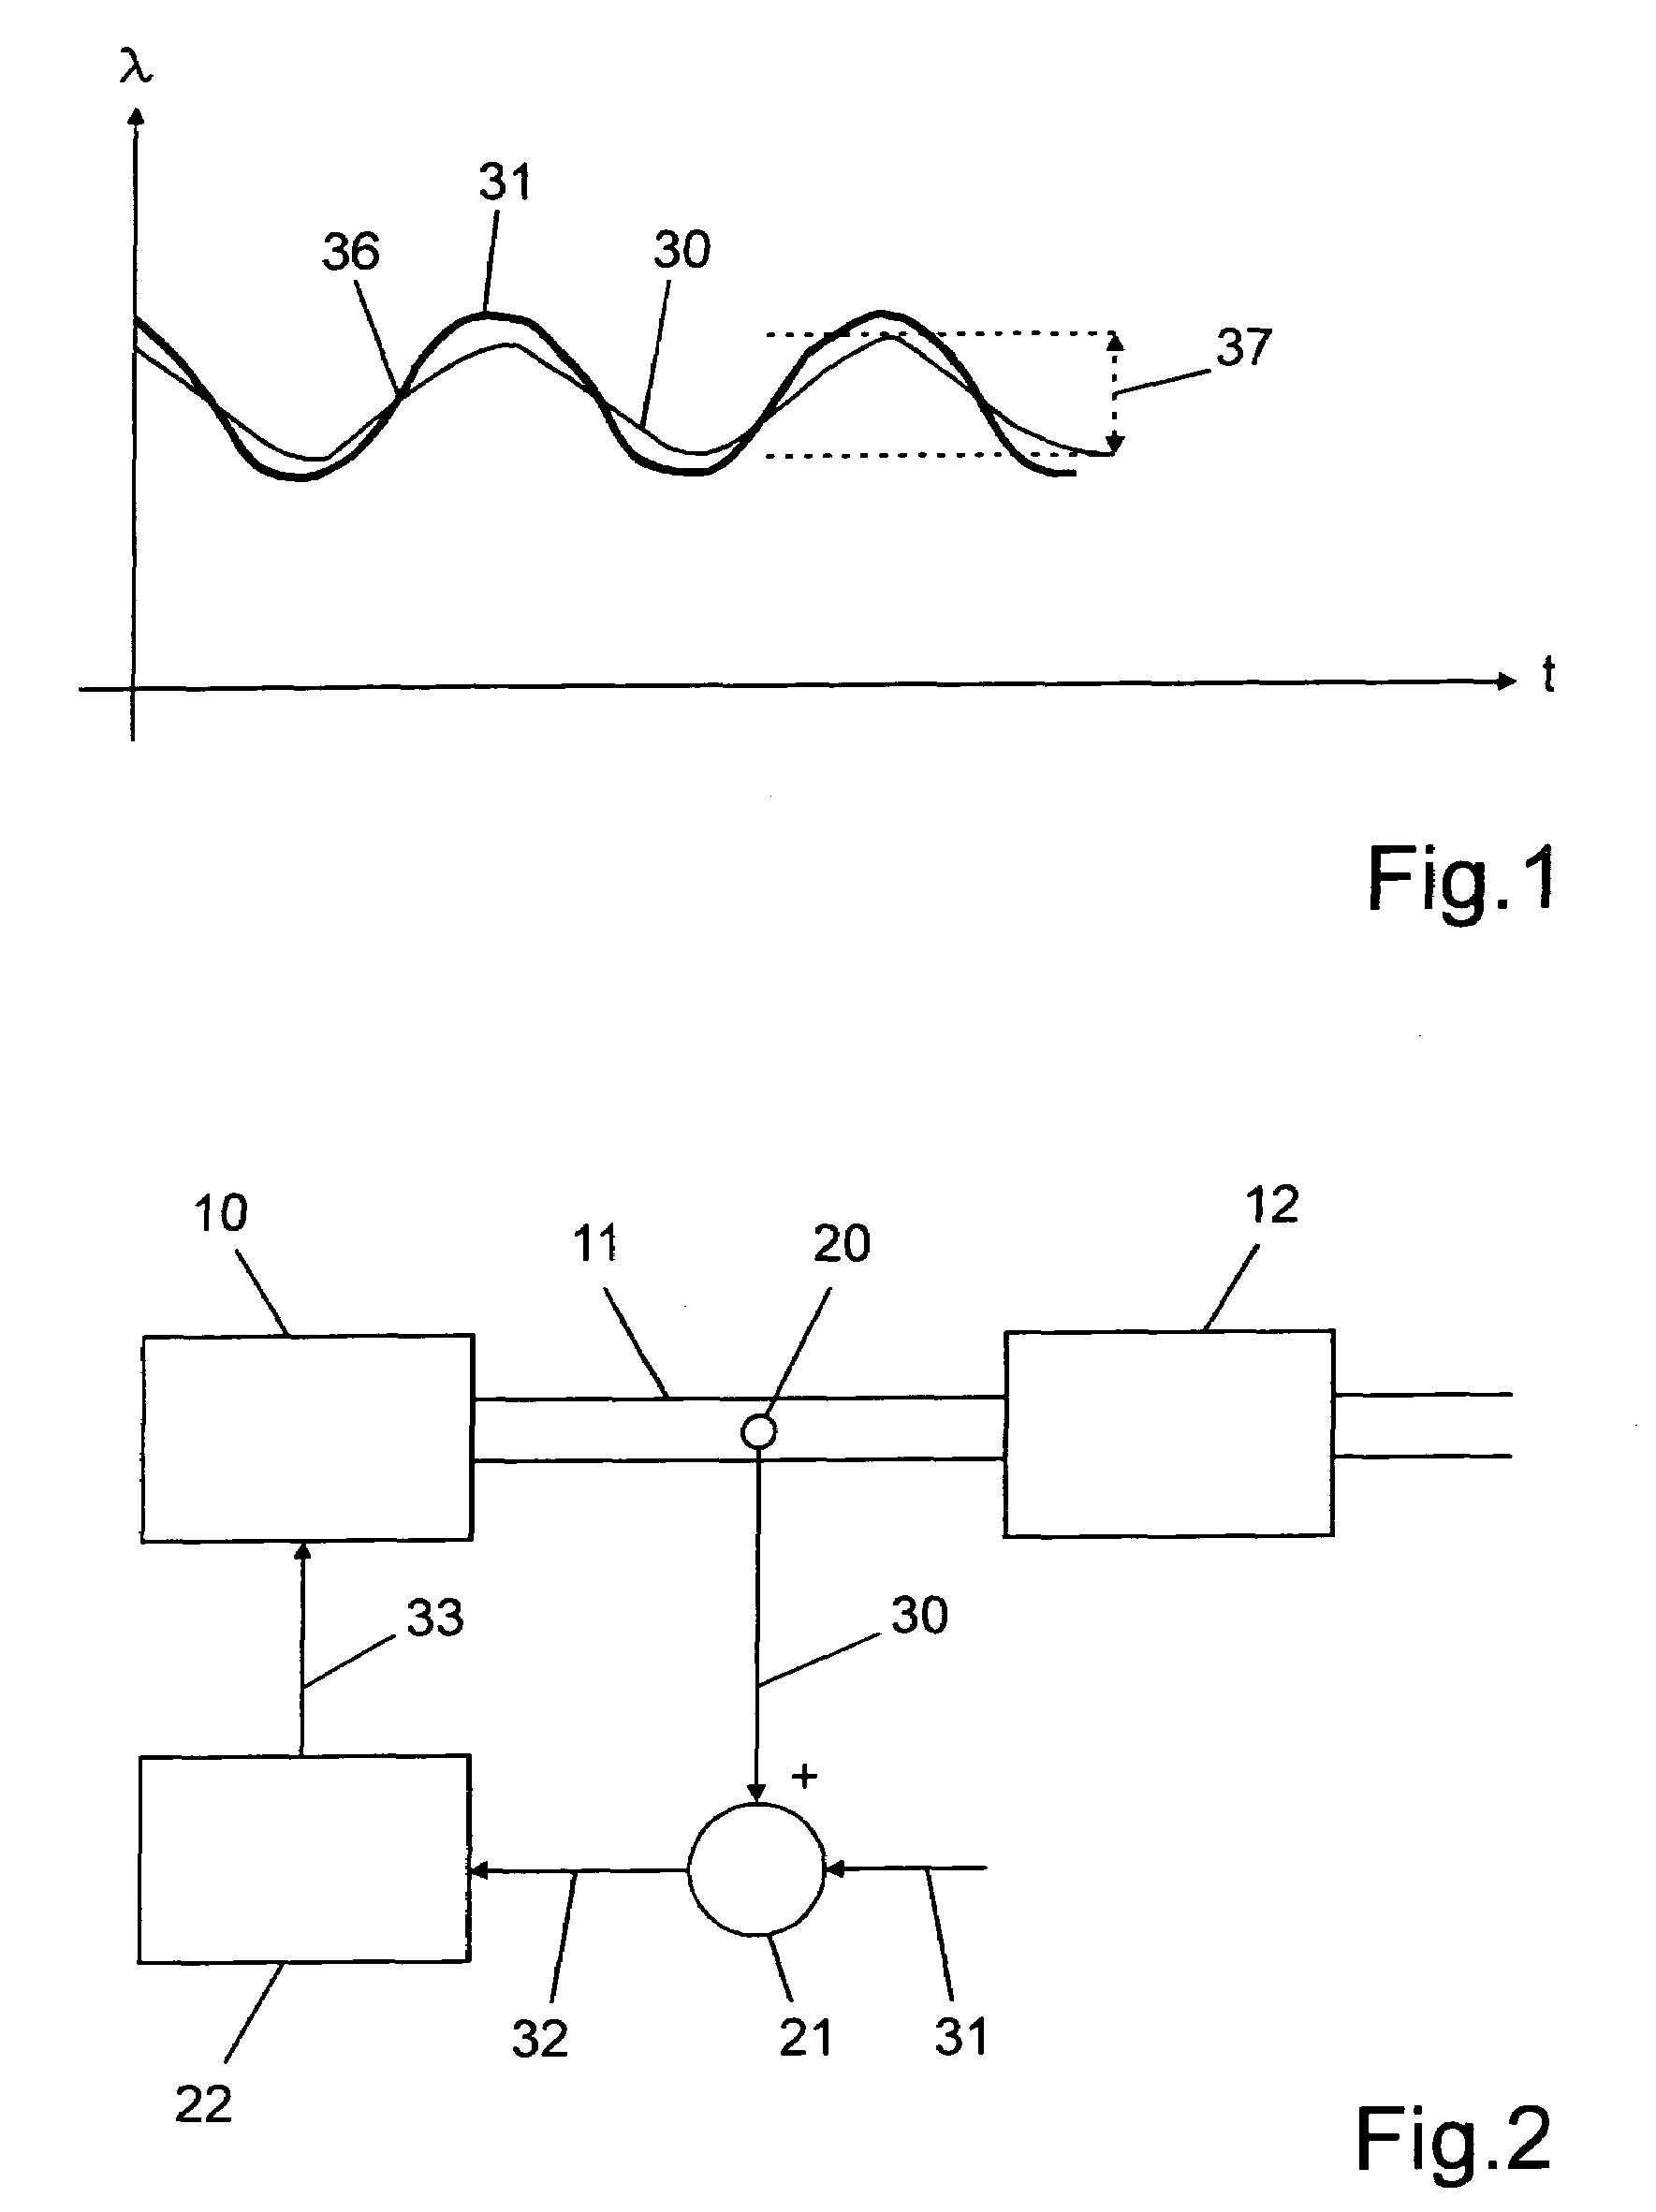 Method for dynamic diagnosis of an exhaust gas analyzer probe